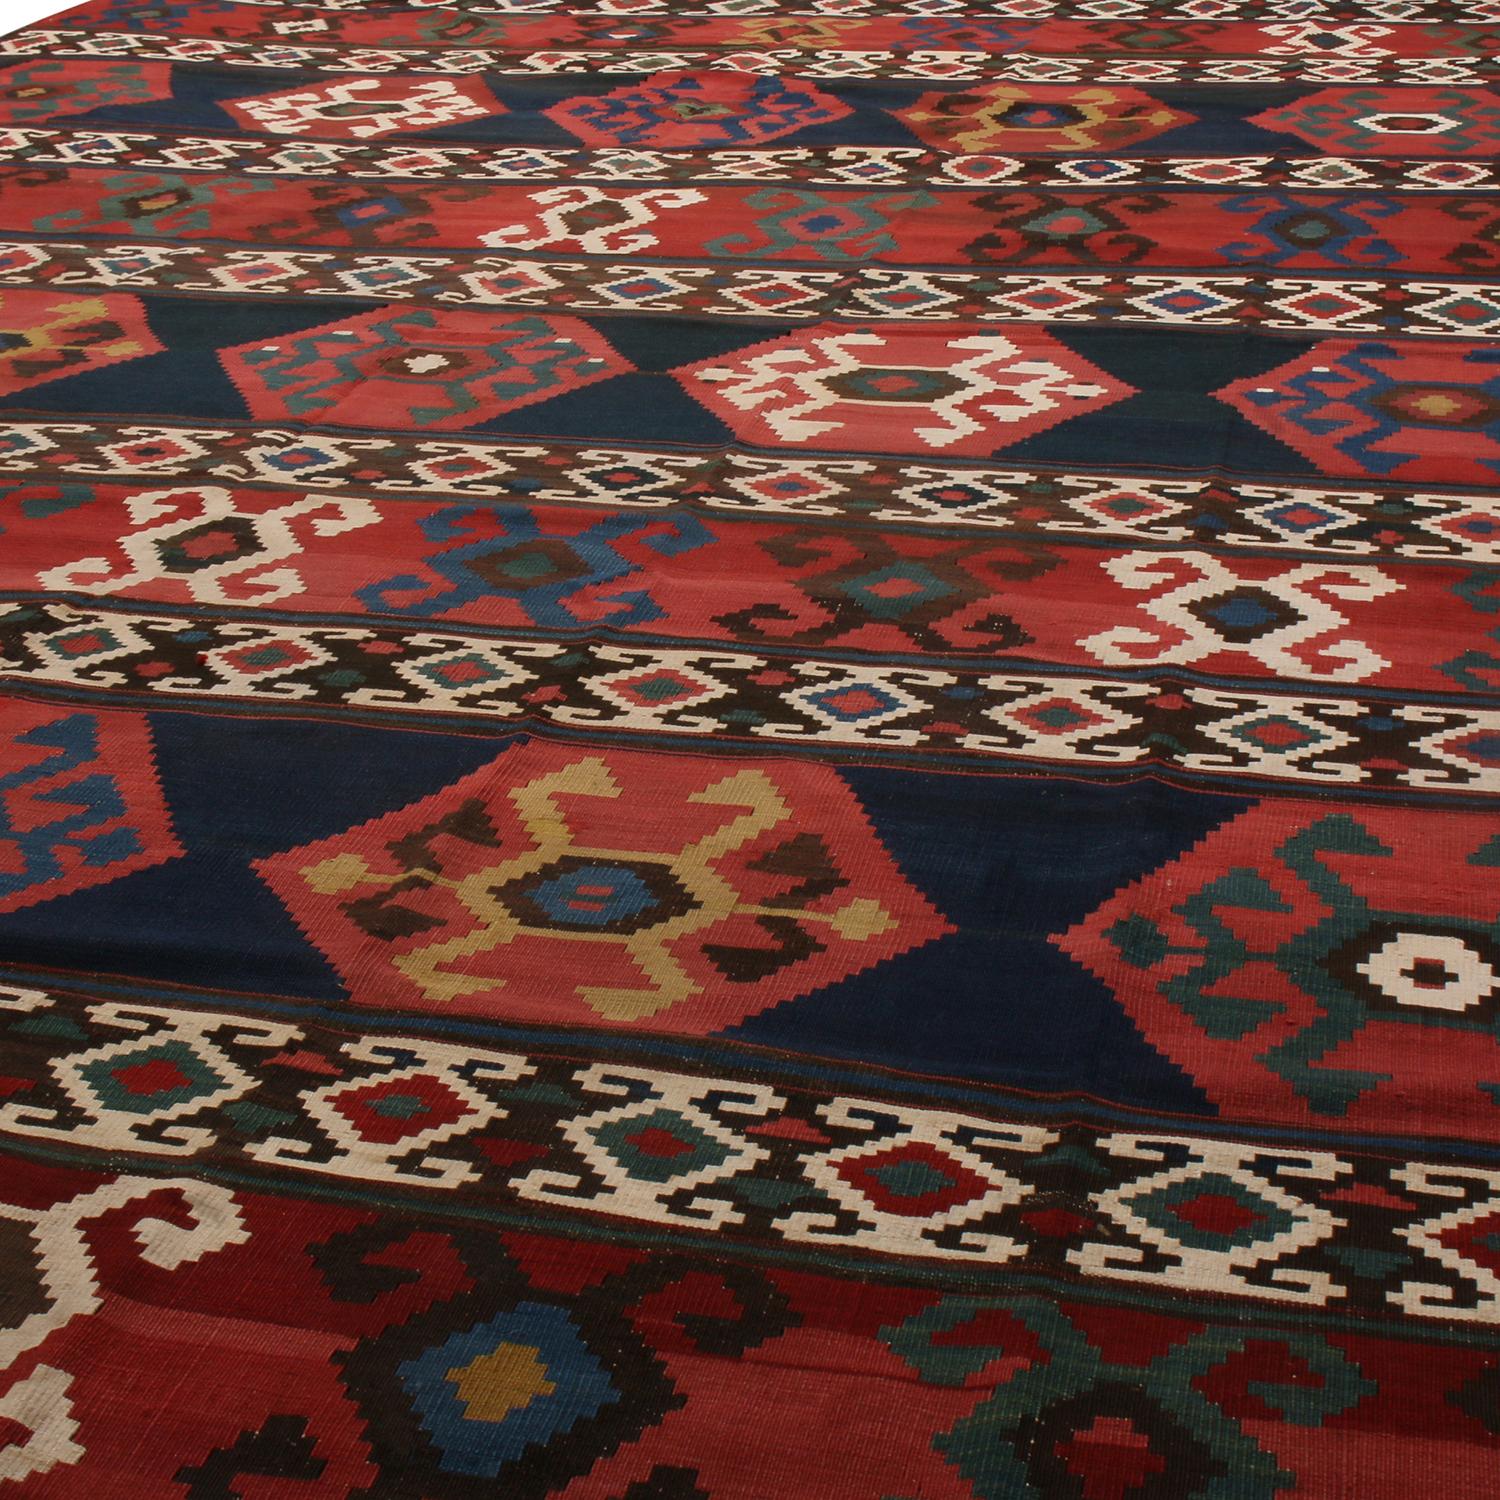 Turkish Antique Geometric Navy Blue and Burgundy Wool Kilim with White and Green Accents